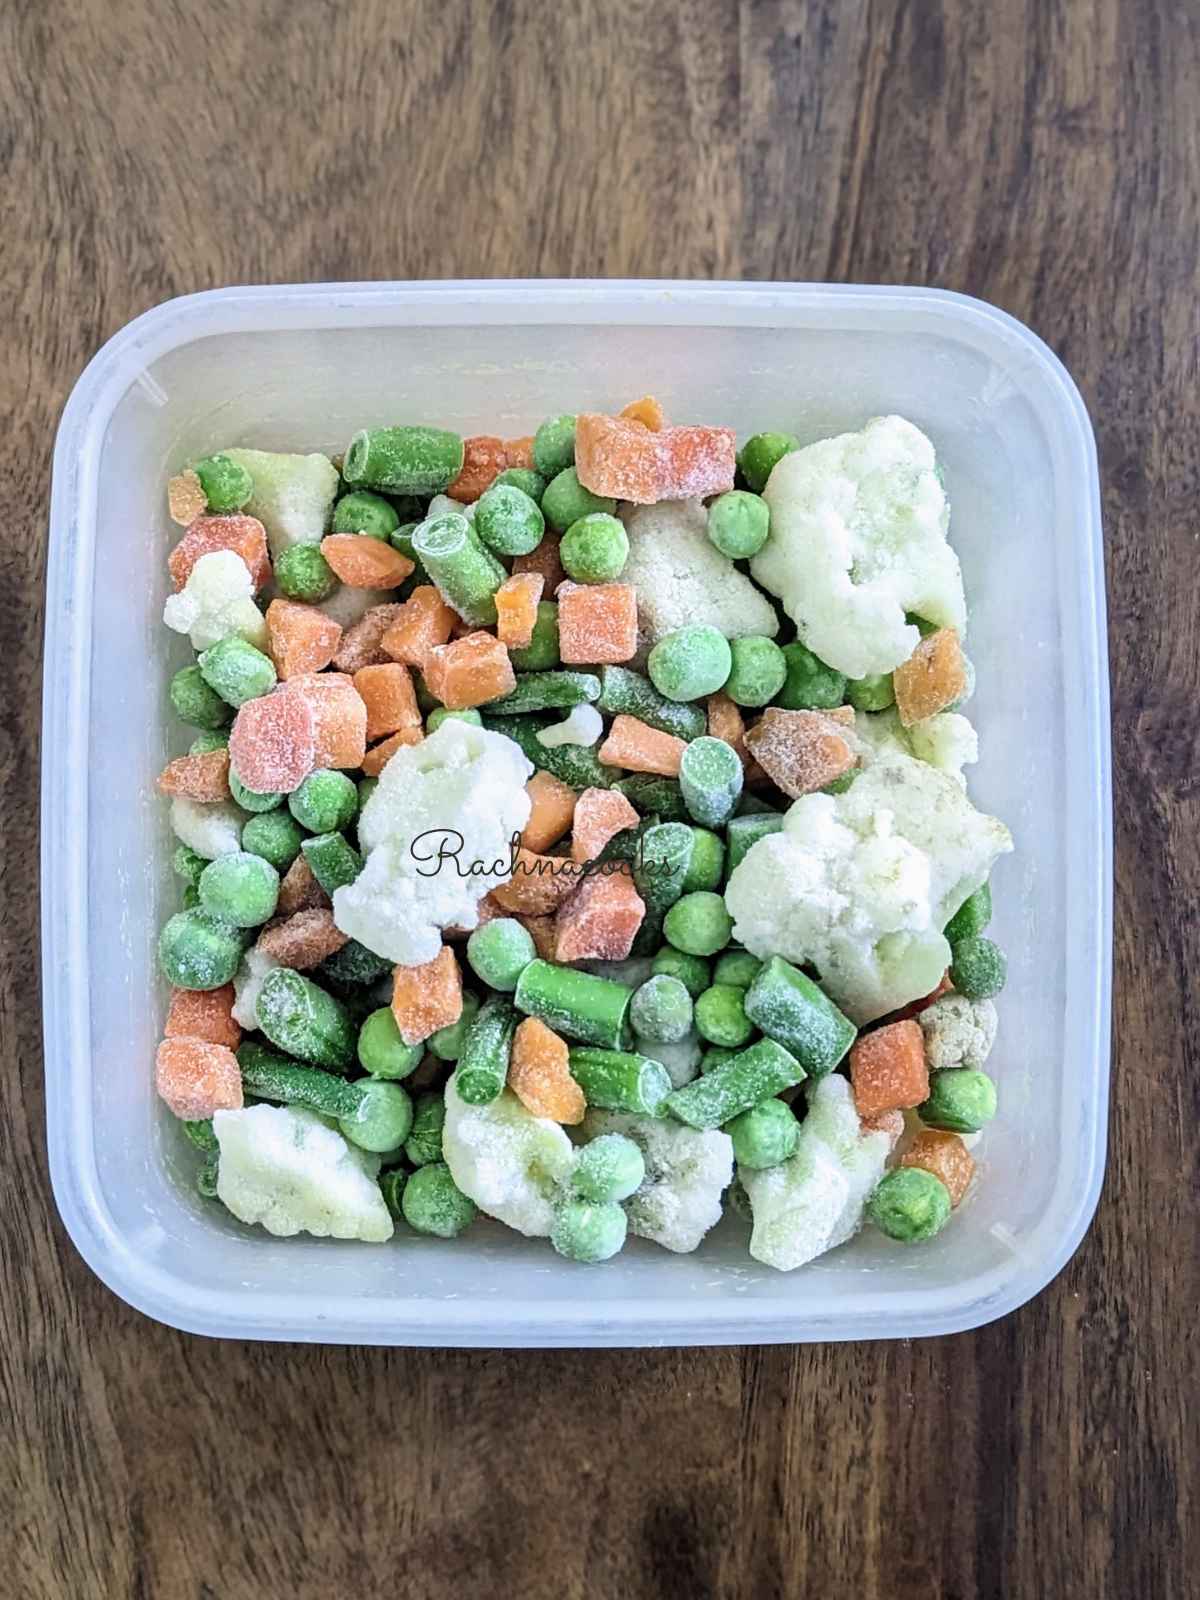 Frozen mixed vegetables in a bowl